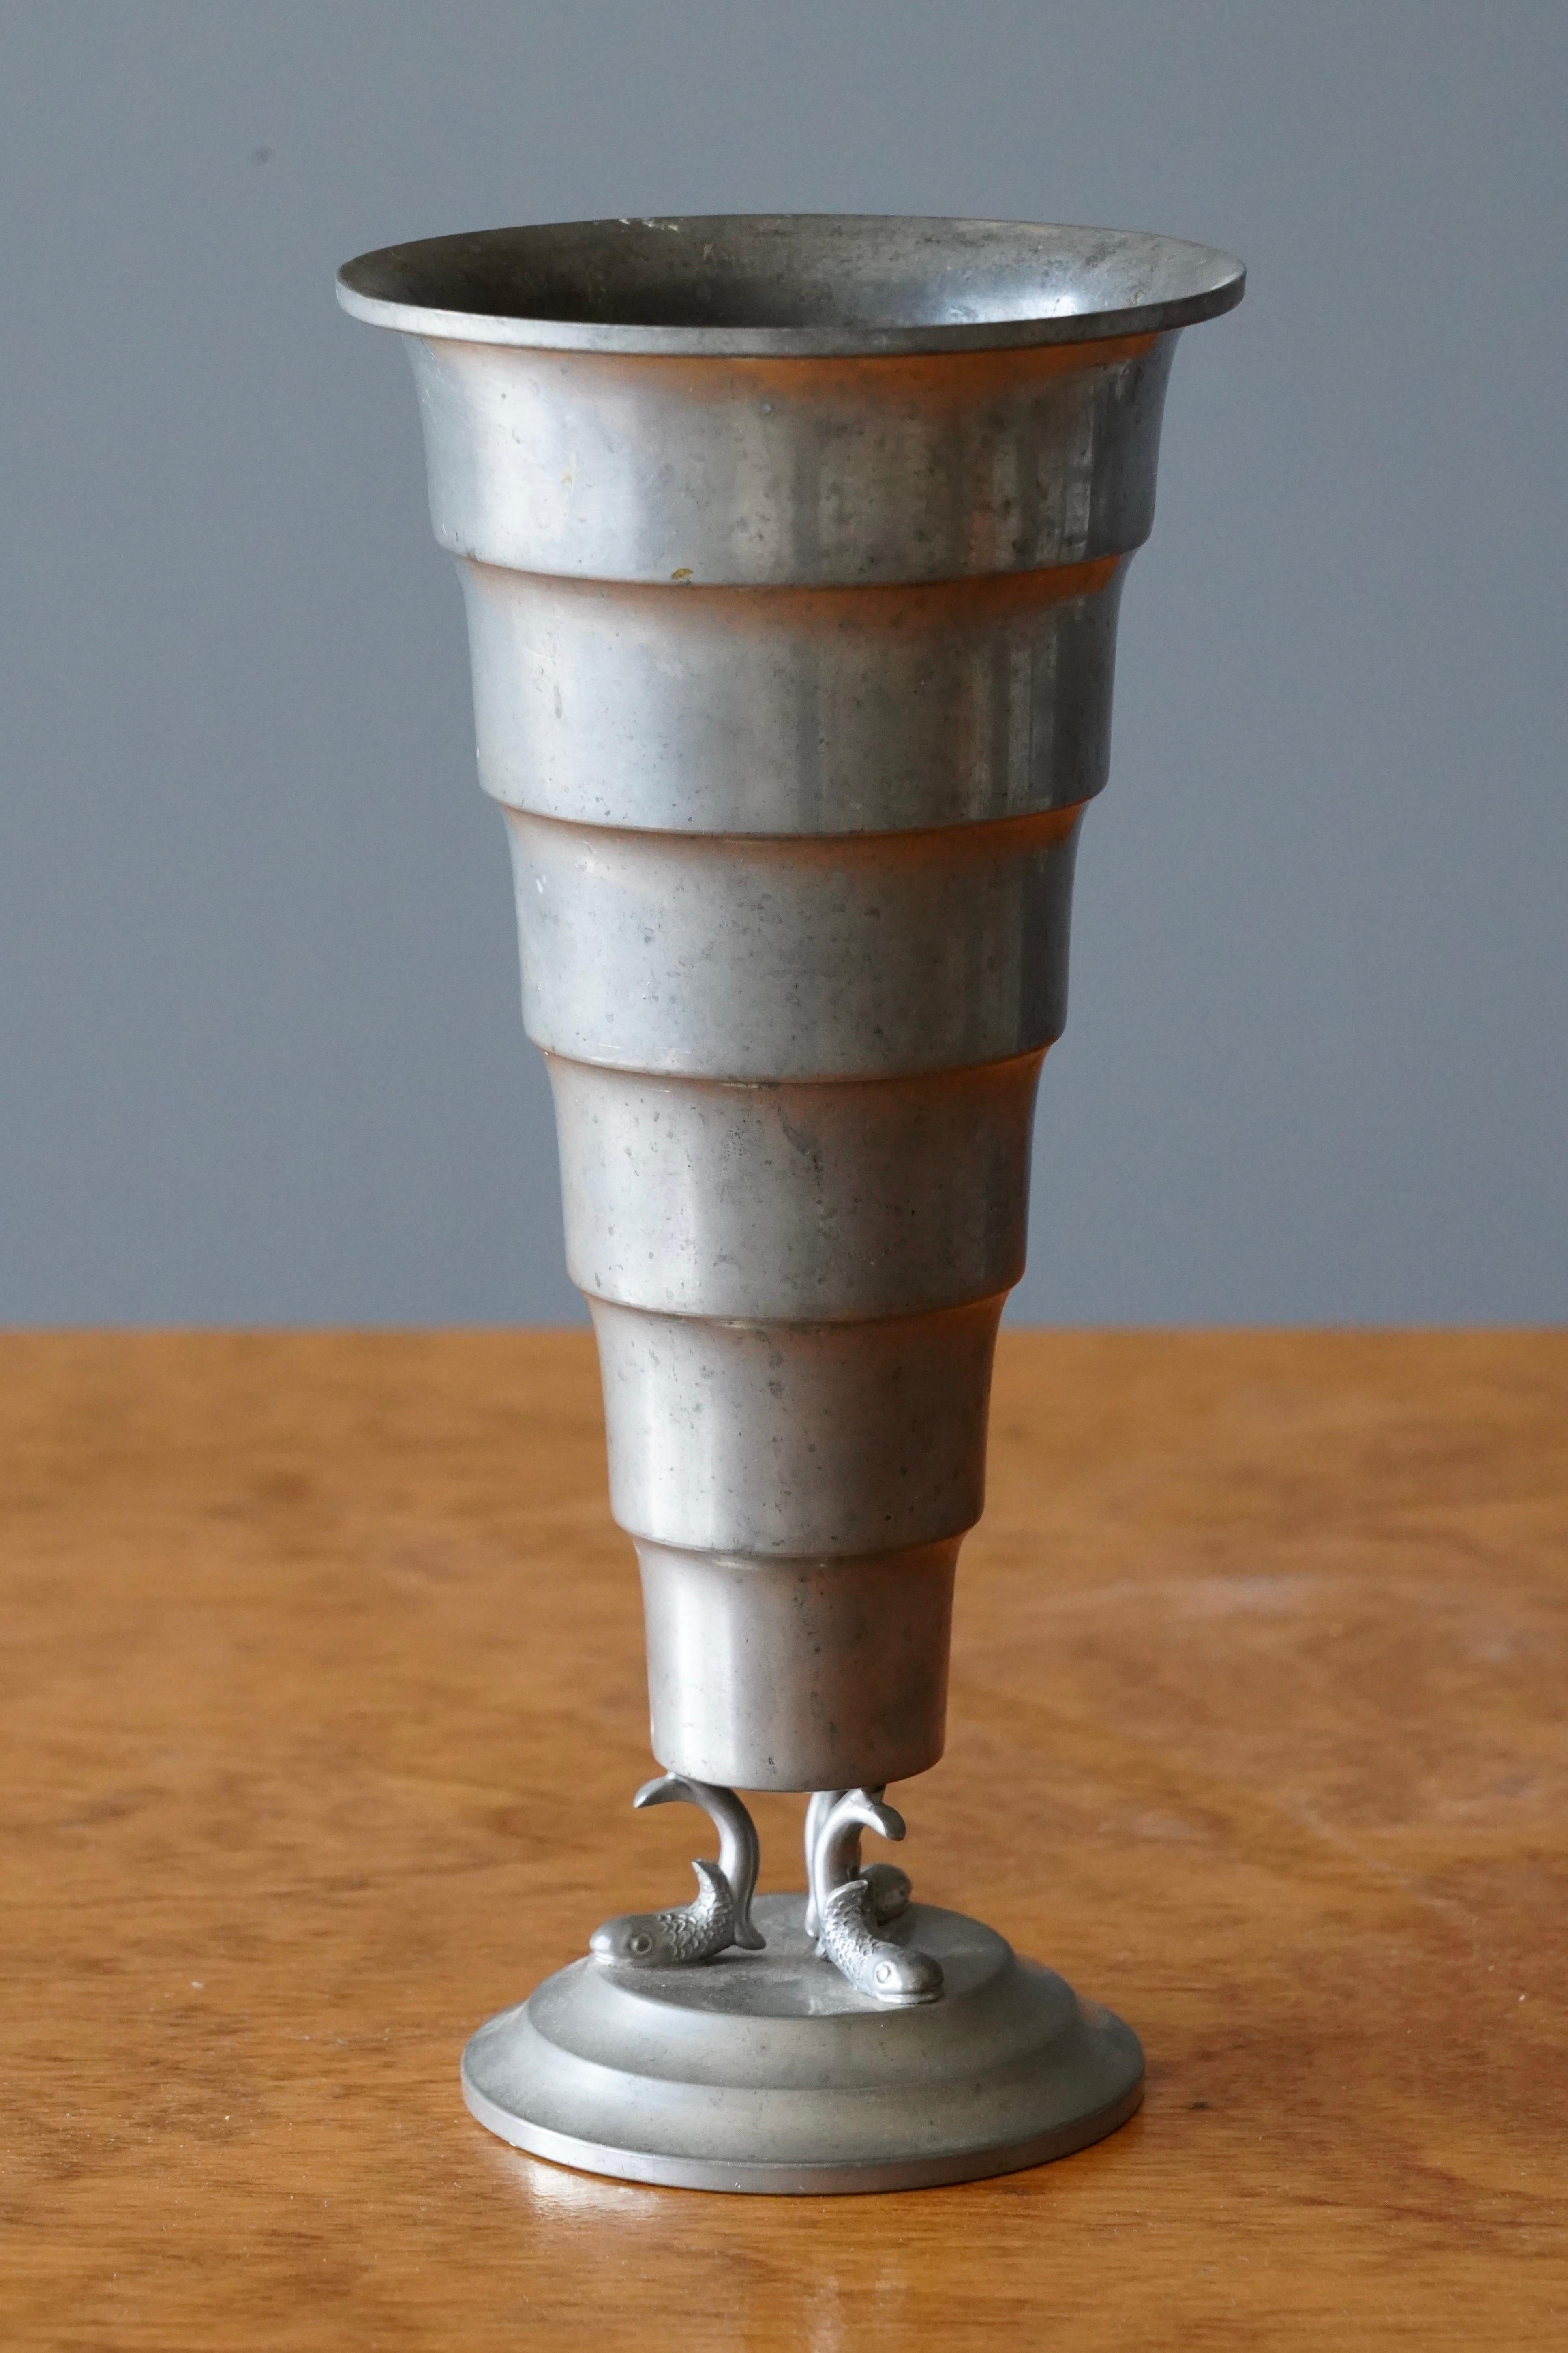 A vase, produced by Svenskt Tenn, features multiple engravings stamped with makers mark, Sweden, 1930s. In cast pewter. Features sculptural fish motifs.

Other designers of the period include Josef Frank, Kaare Klint, Estrid Ericson, and Just